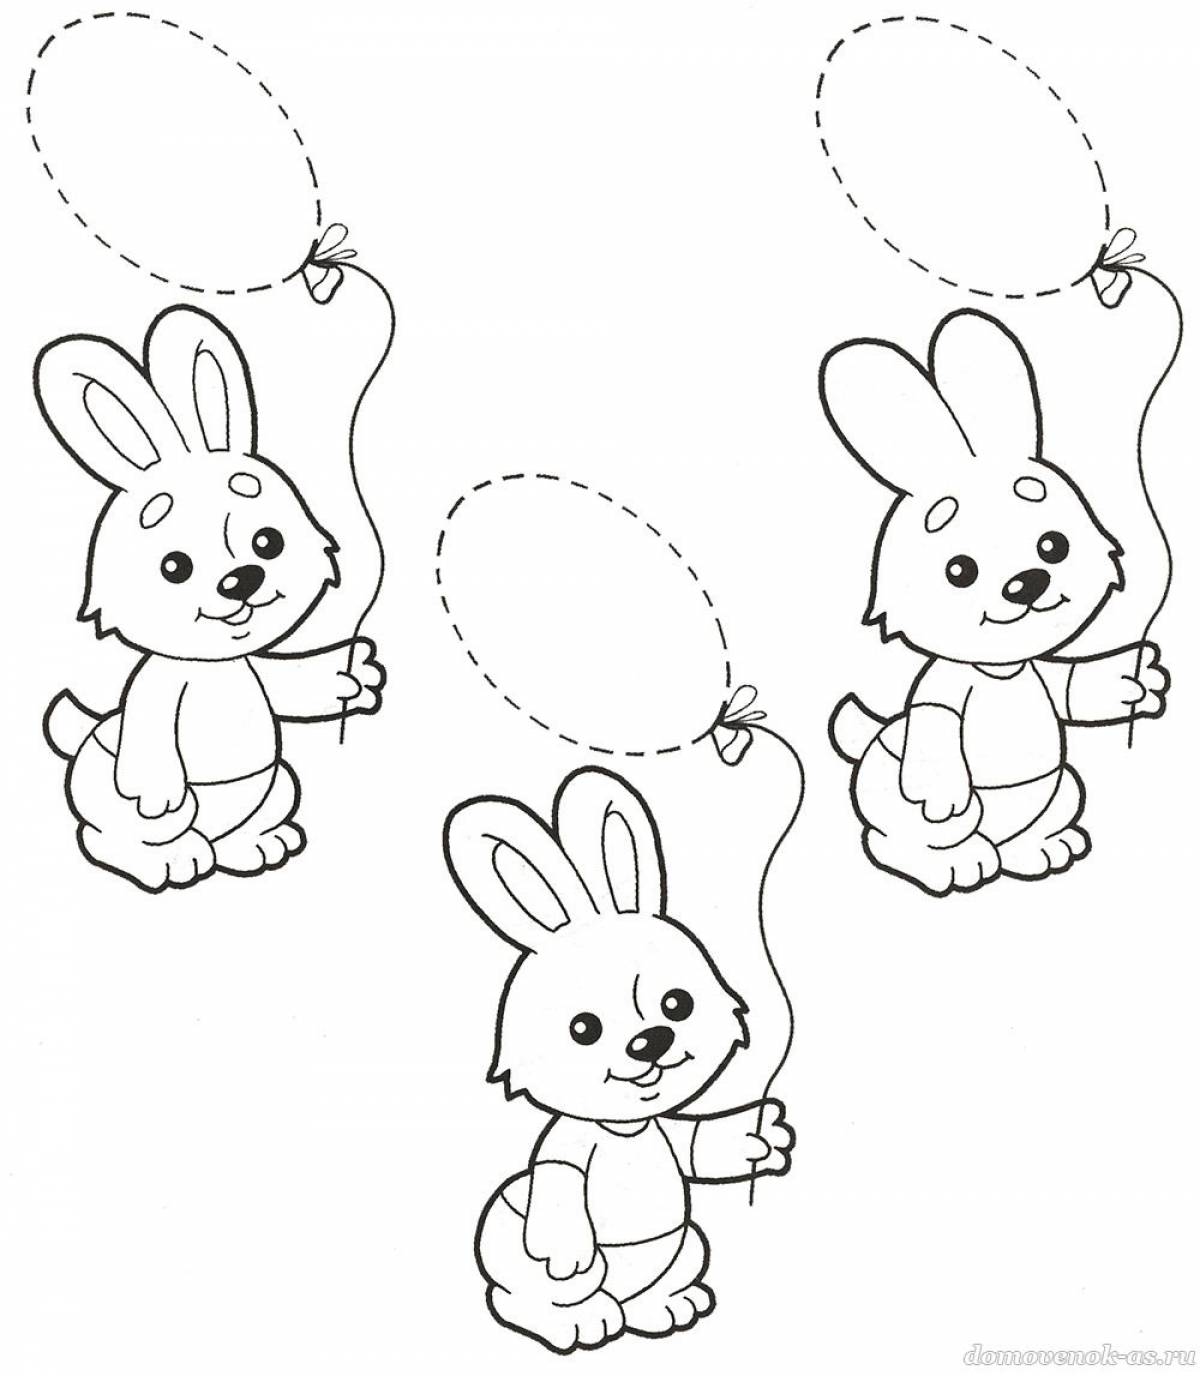 Bunny with balloons #3